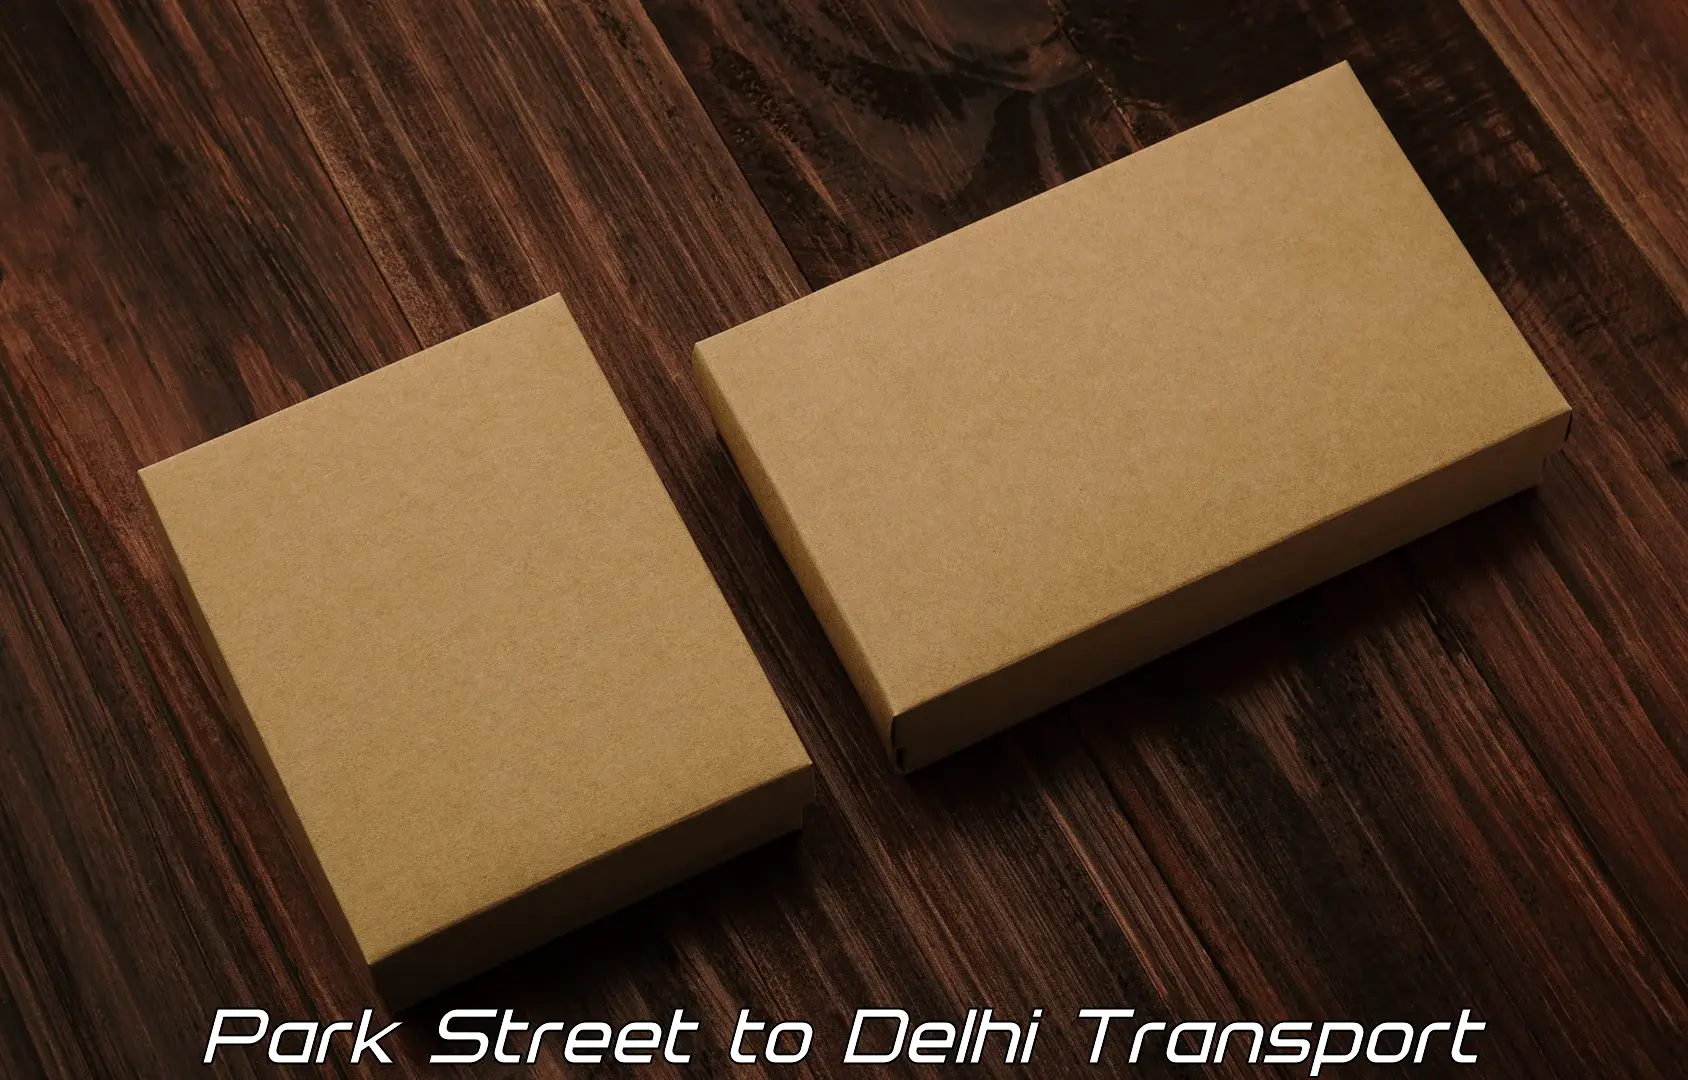 All India transport service Park Street to Lodhi Road